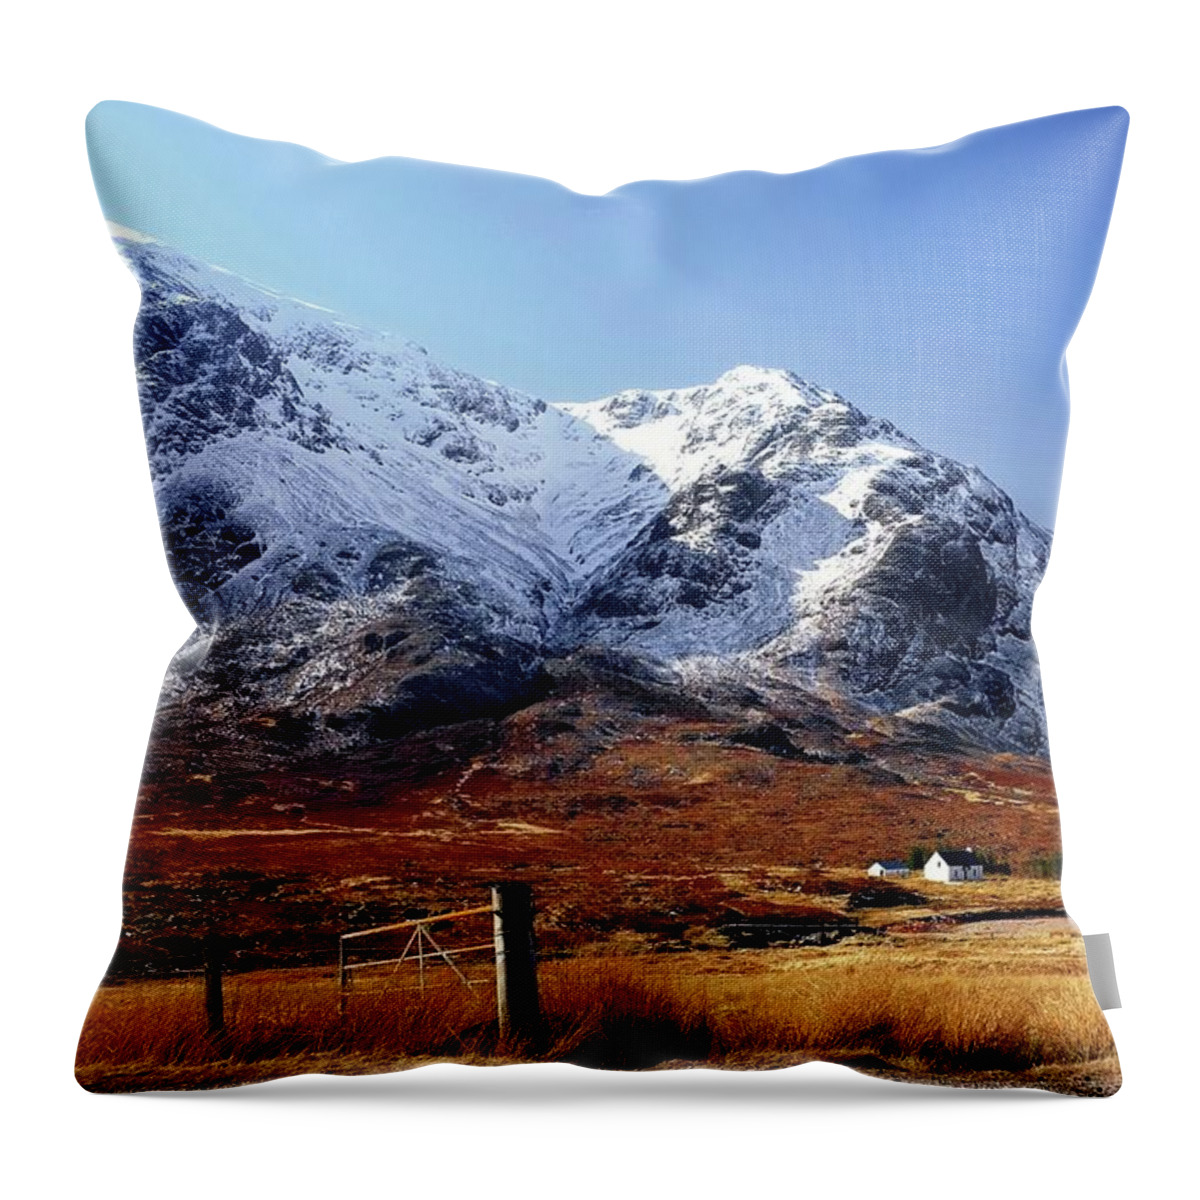 Tranquility Throw Pillow featuring the photograph Scottish Highlands by Andrew Lockie